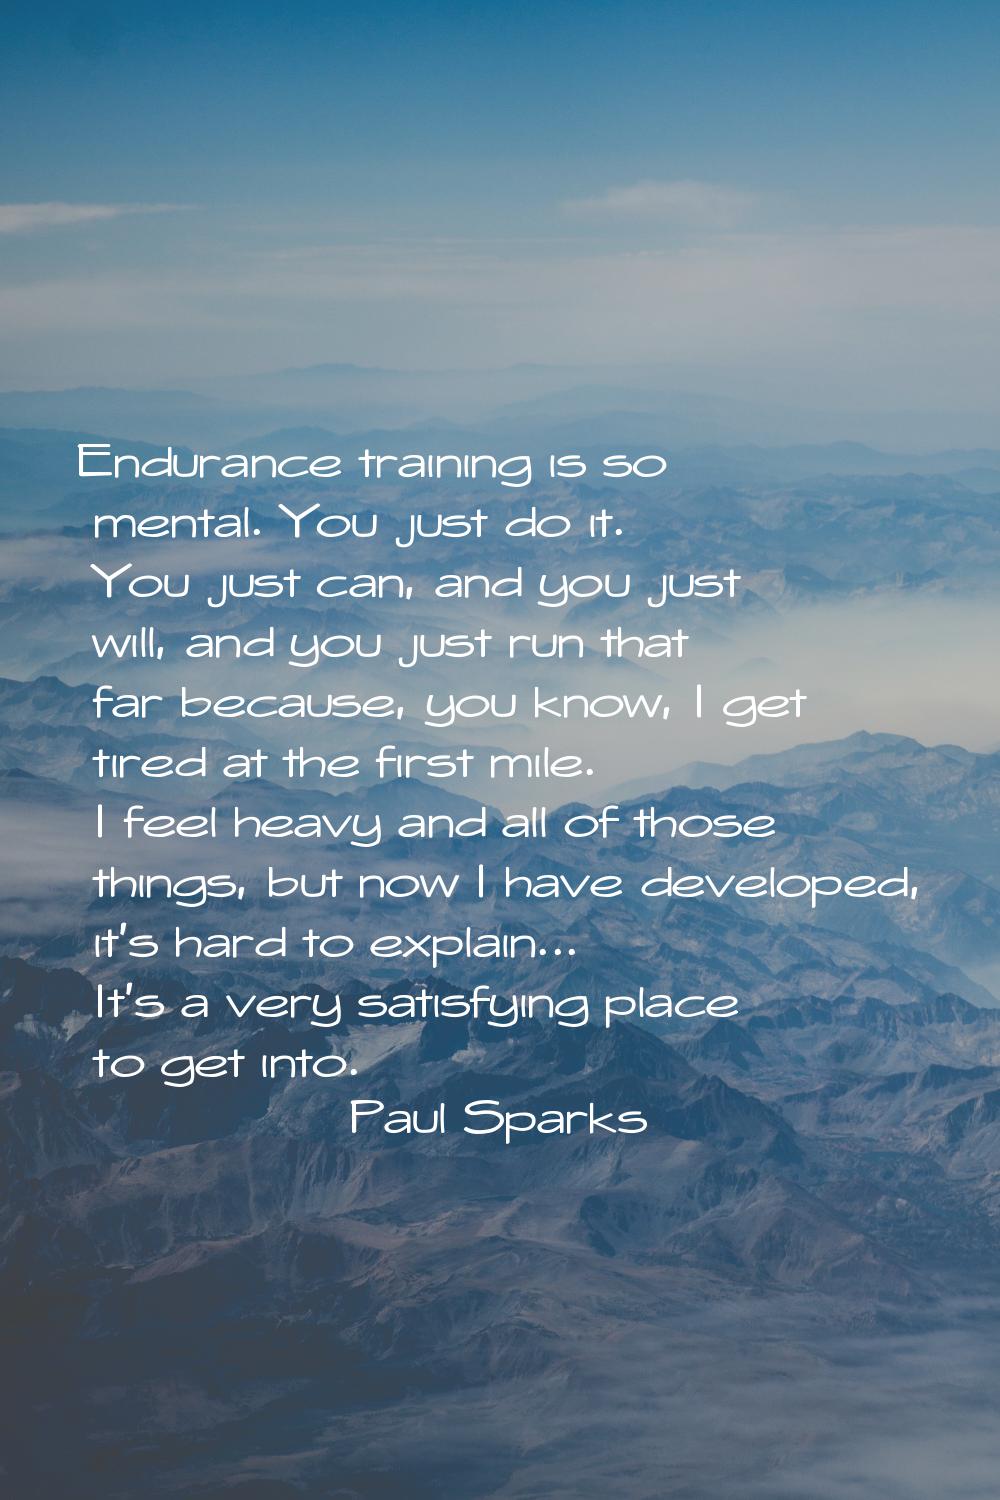 Endurance training is so mental. You just do it. You just can, and you just will, and you just run 